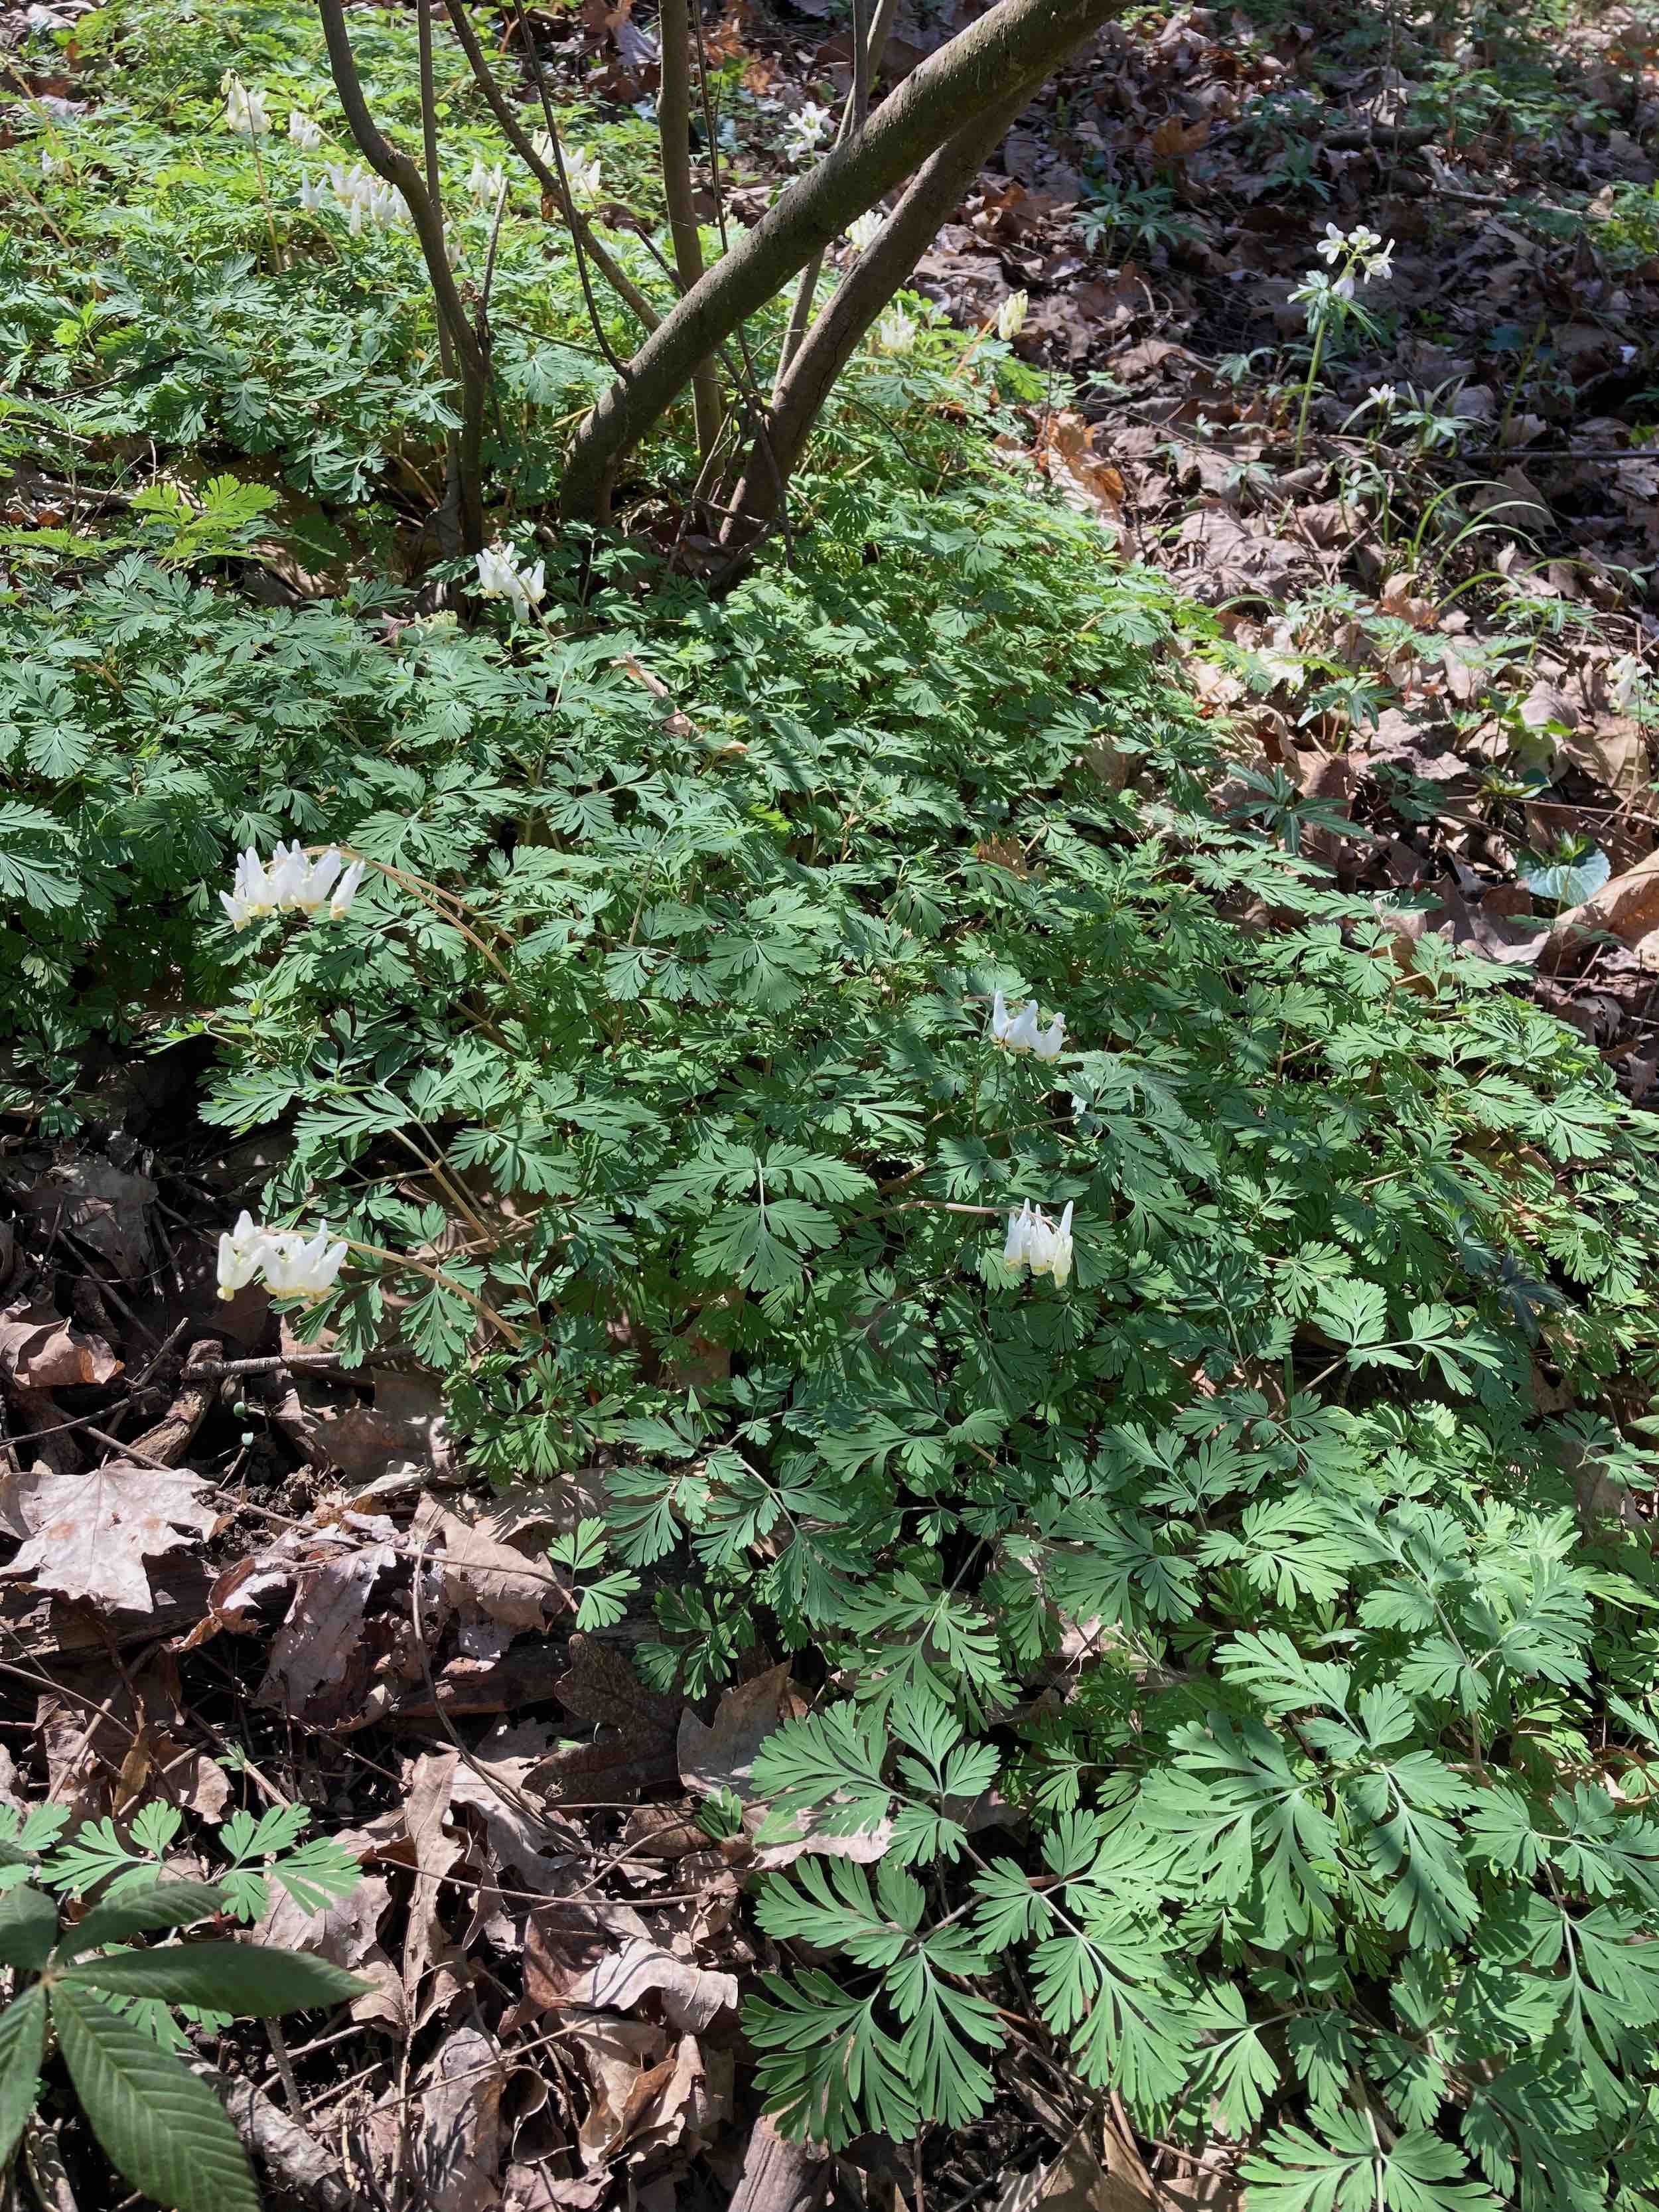 The Scientific Name is Dicentra cucullaria. You will likely hear them called Dutchman's Breeches, Dutchman's Britches. This picture shows the Large stands growing at Willie Duke's Bluff. The blue-green, ternately compound leaves are very lacey in appearance. of Dicentra cucullaria